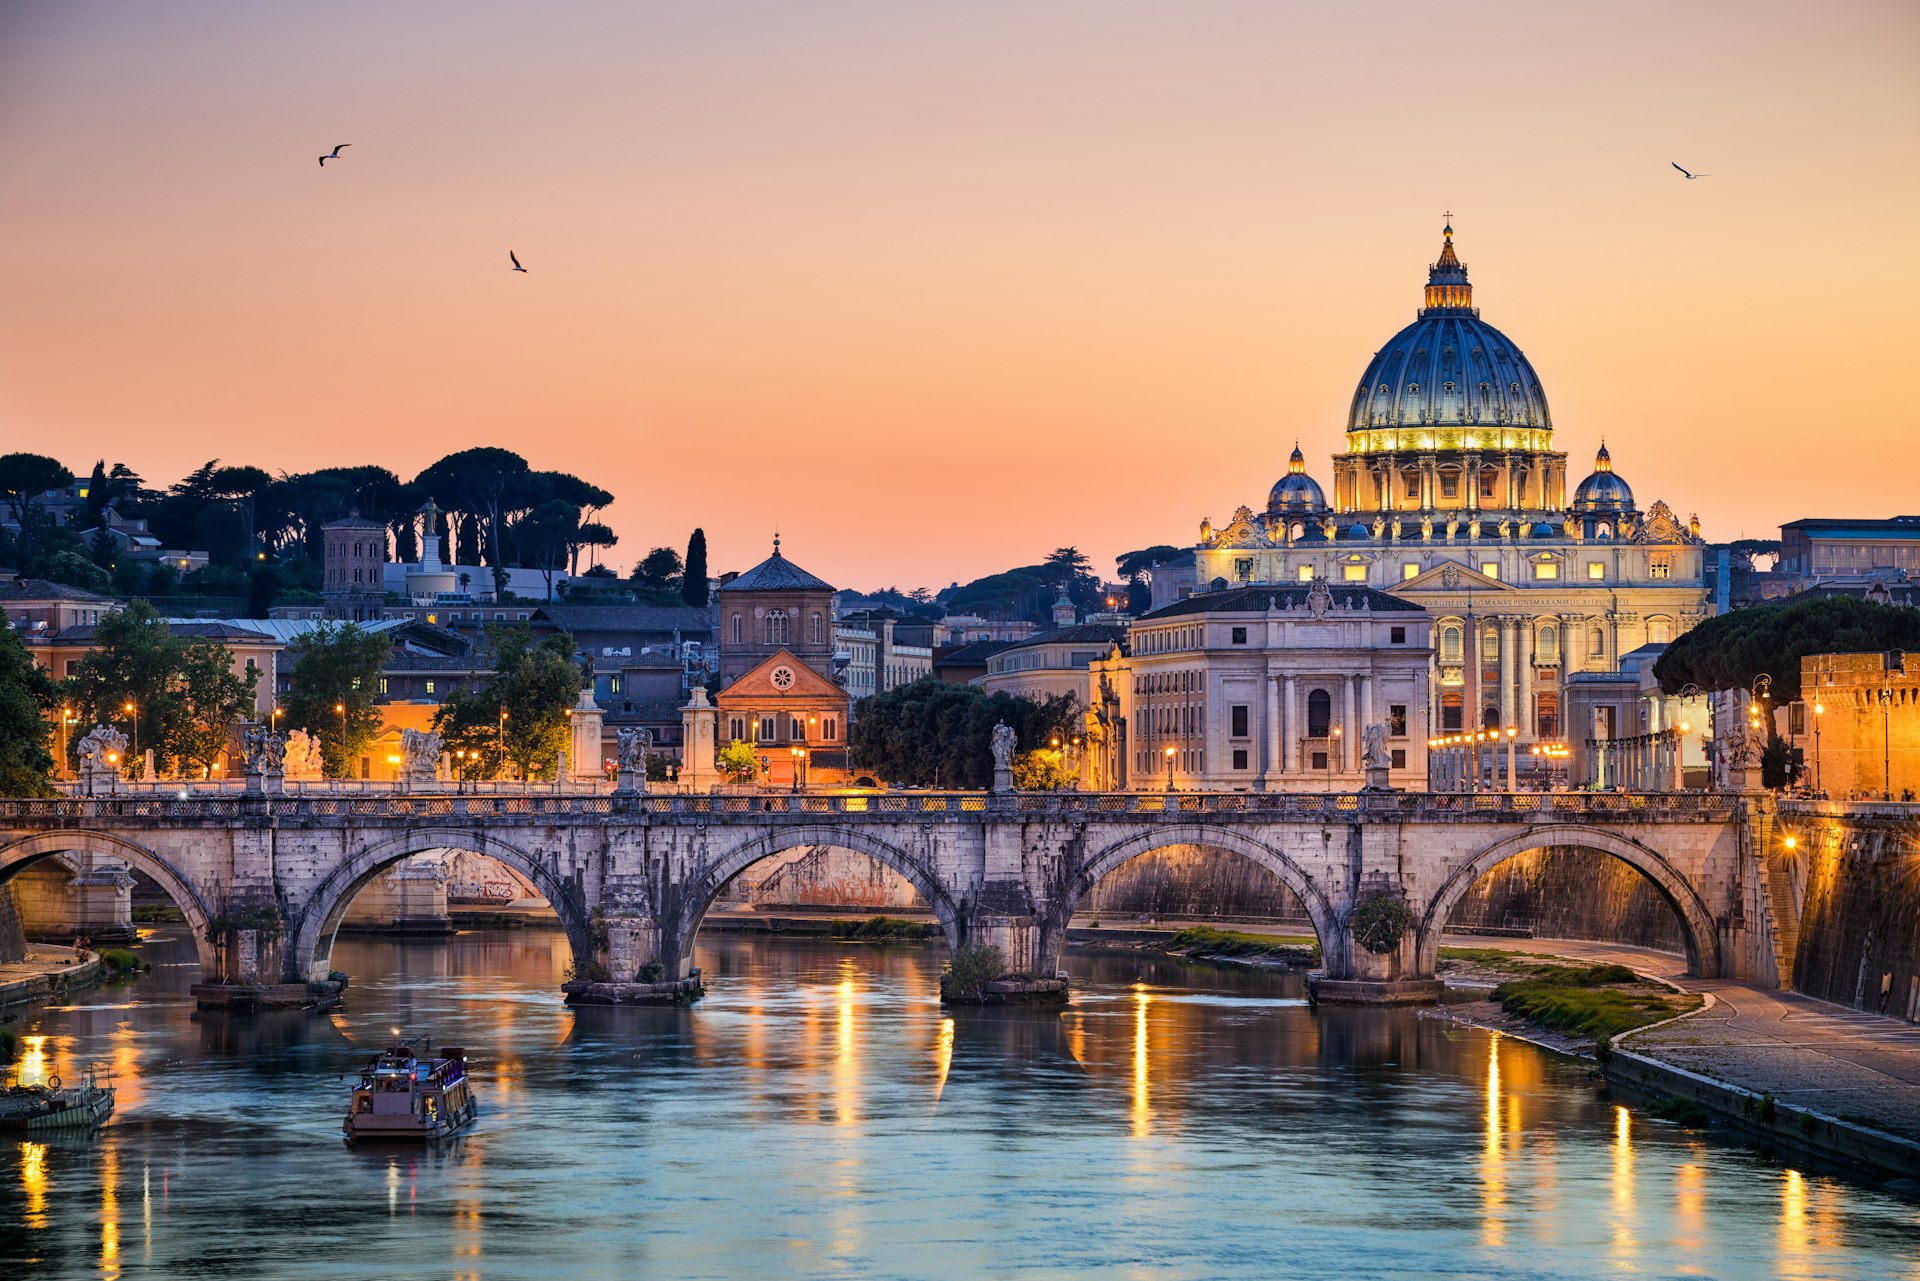 An ancient bridge stands in front of St. Peter's Basilica in Rome. 